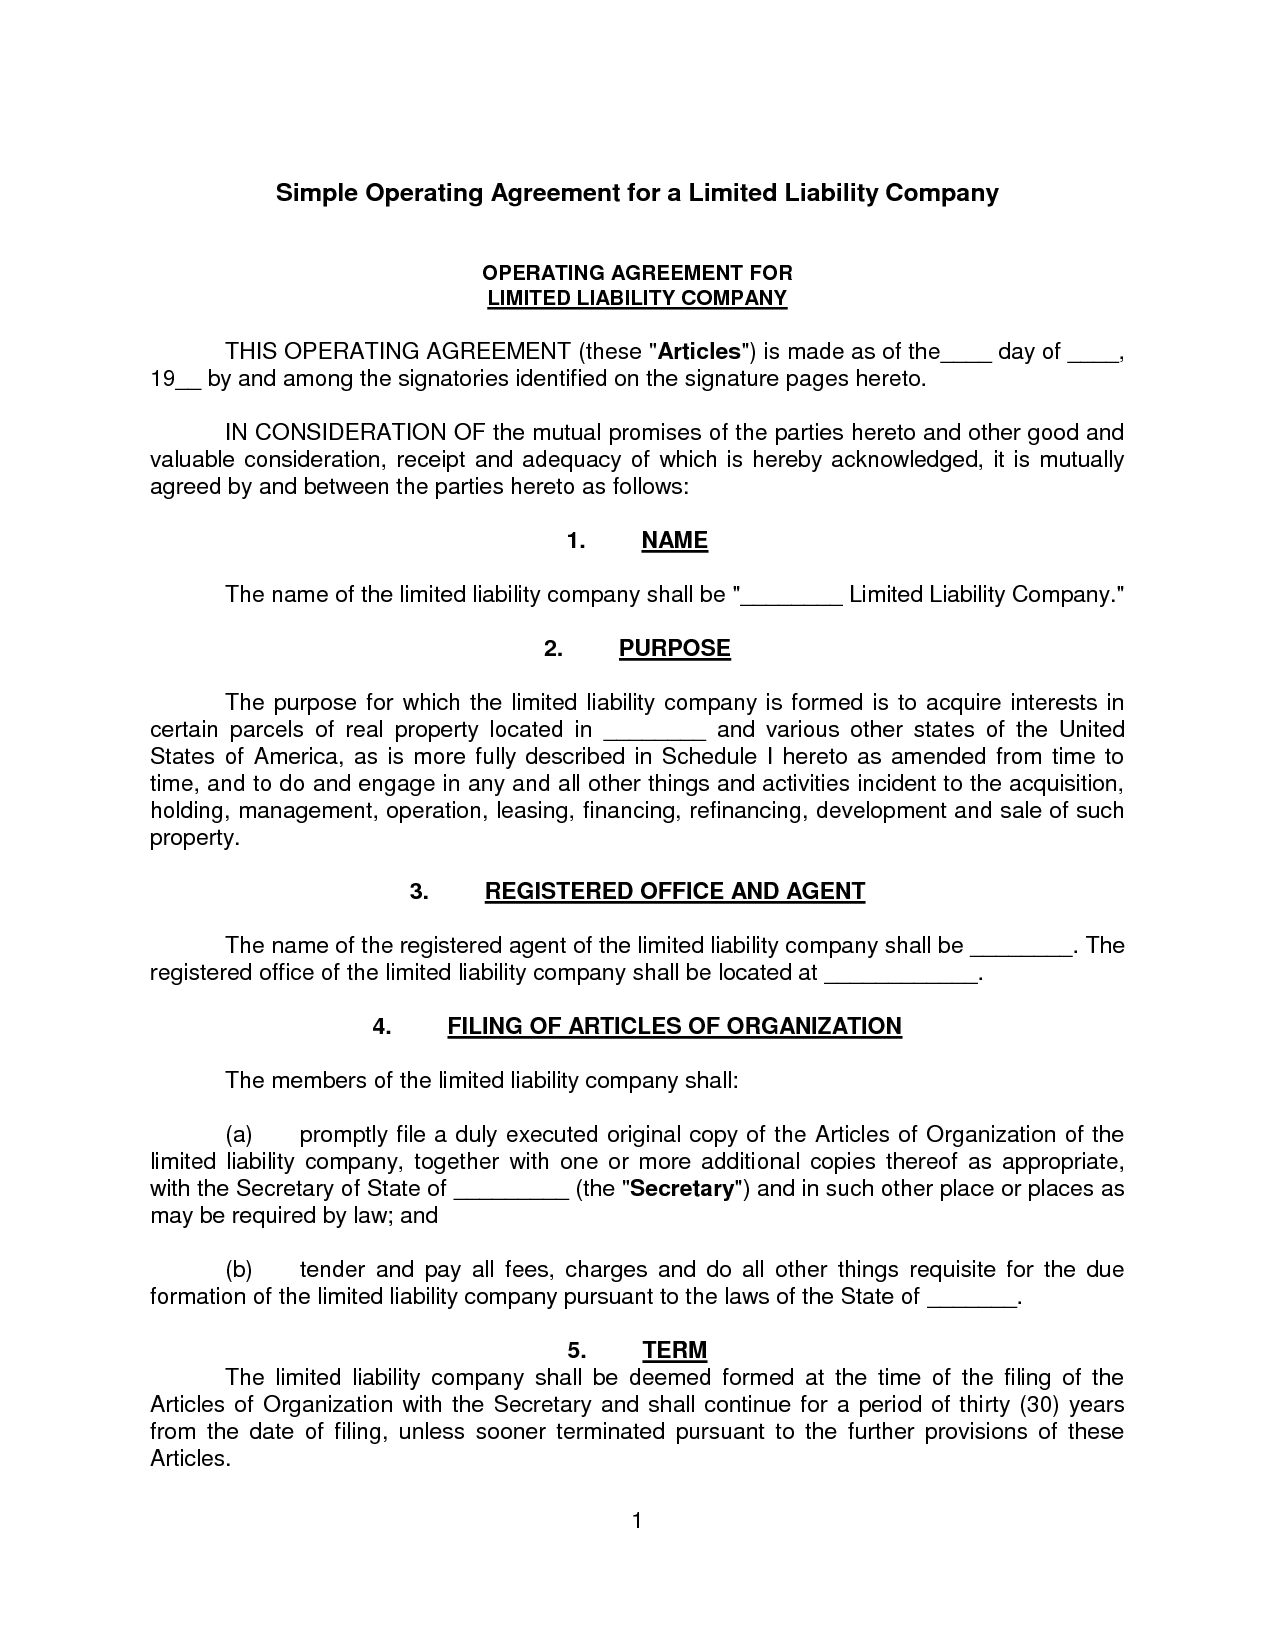 simple-llc-operating-agreement-template-free-printable-documents